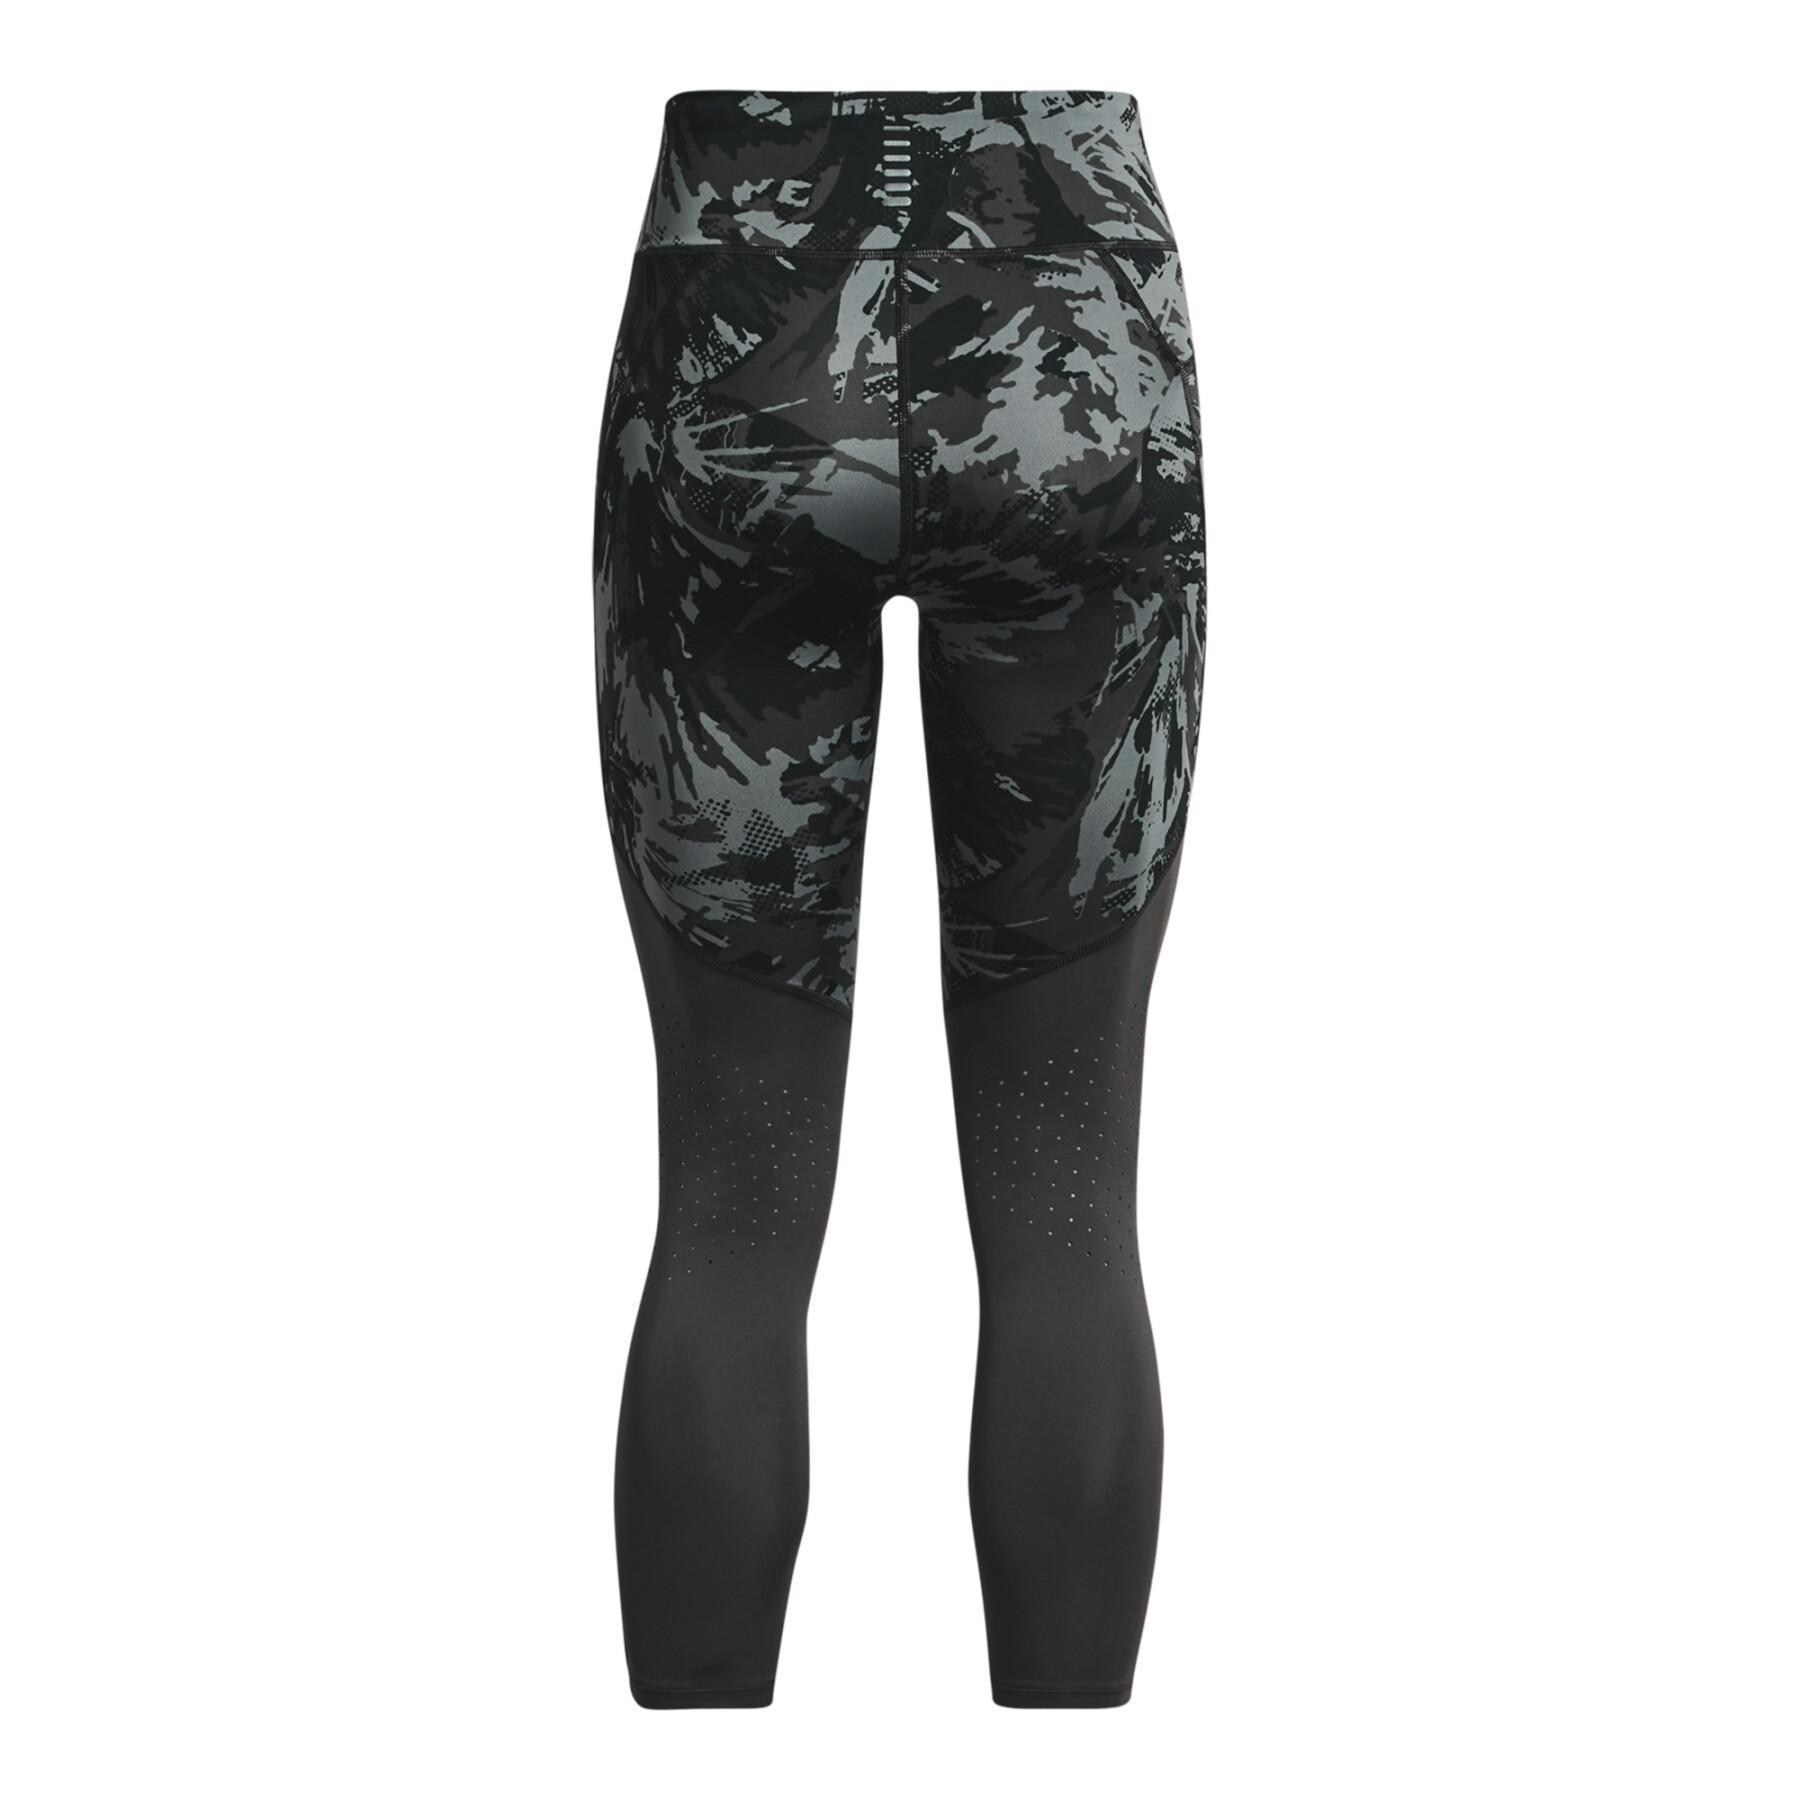 Women's ankle length legging Under Armour Fly fast II